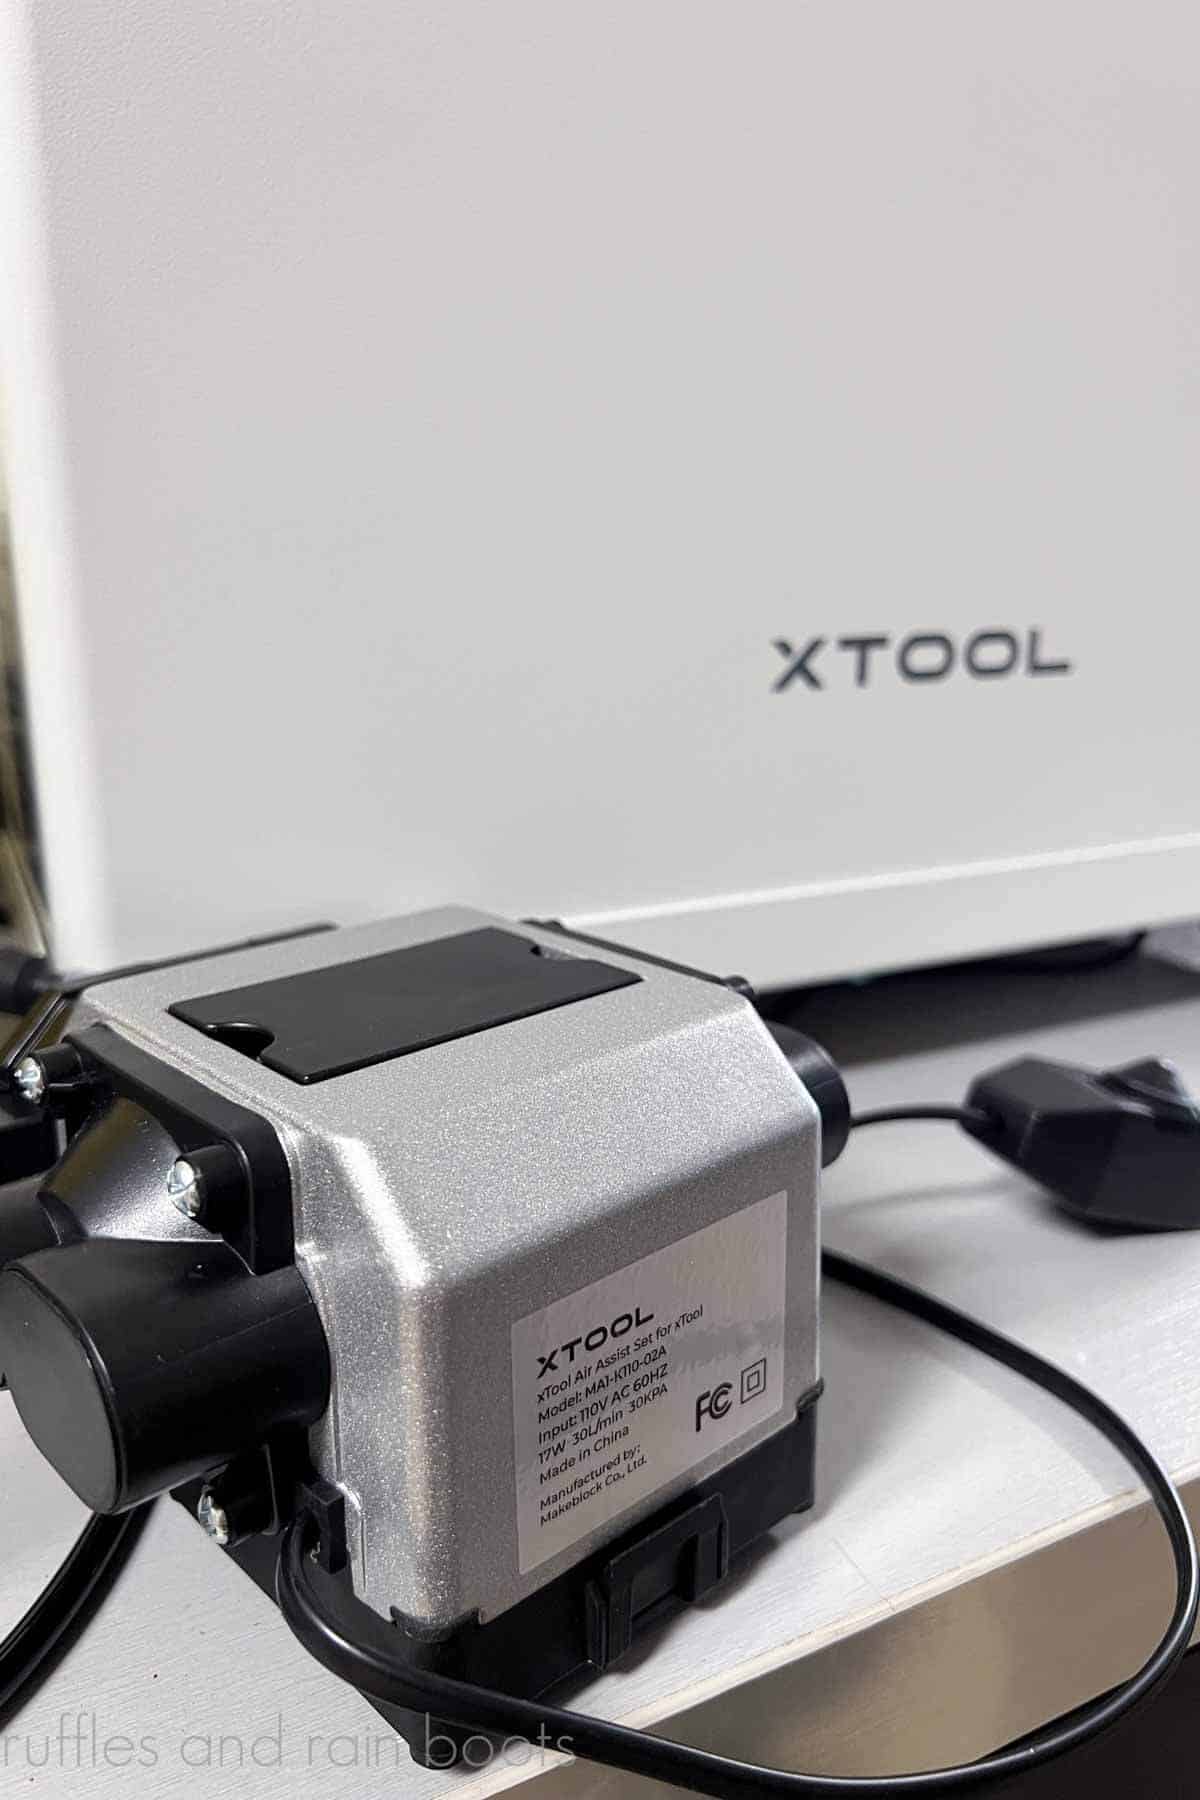 Vertical image of the xTool air assist accessory for the M1 laser in front of the smoke purifier on a work bench.